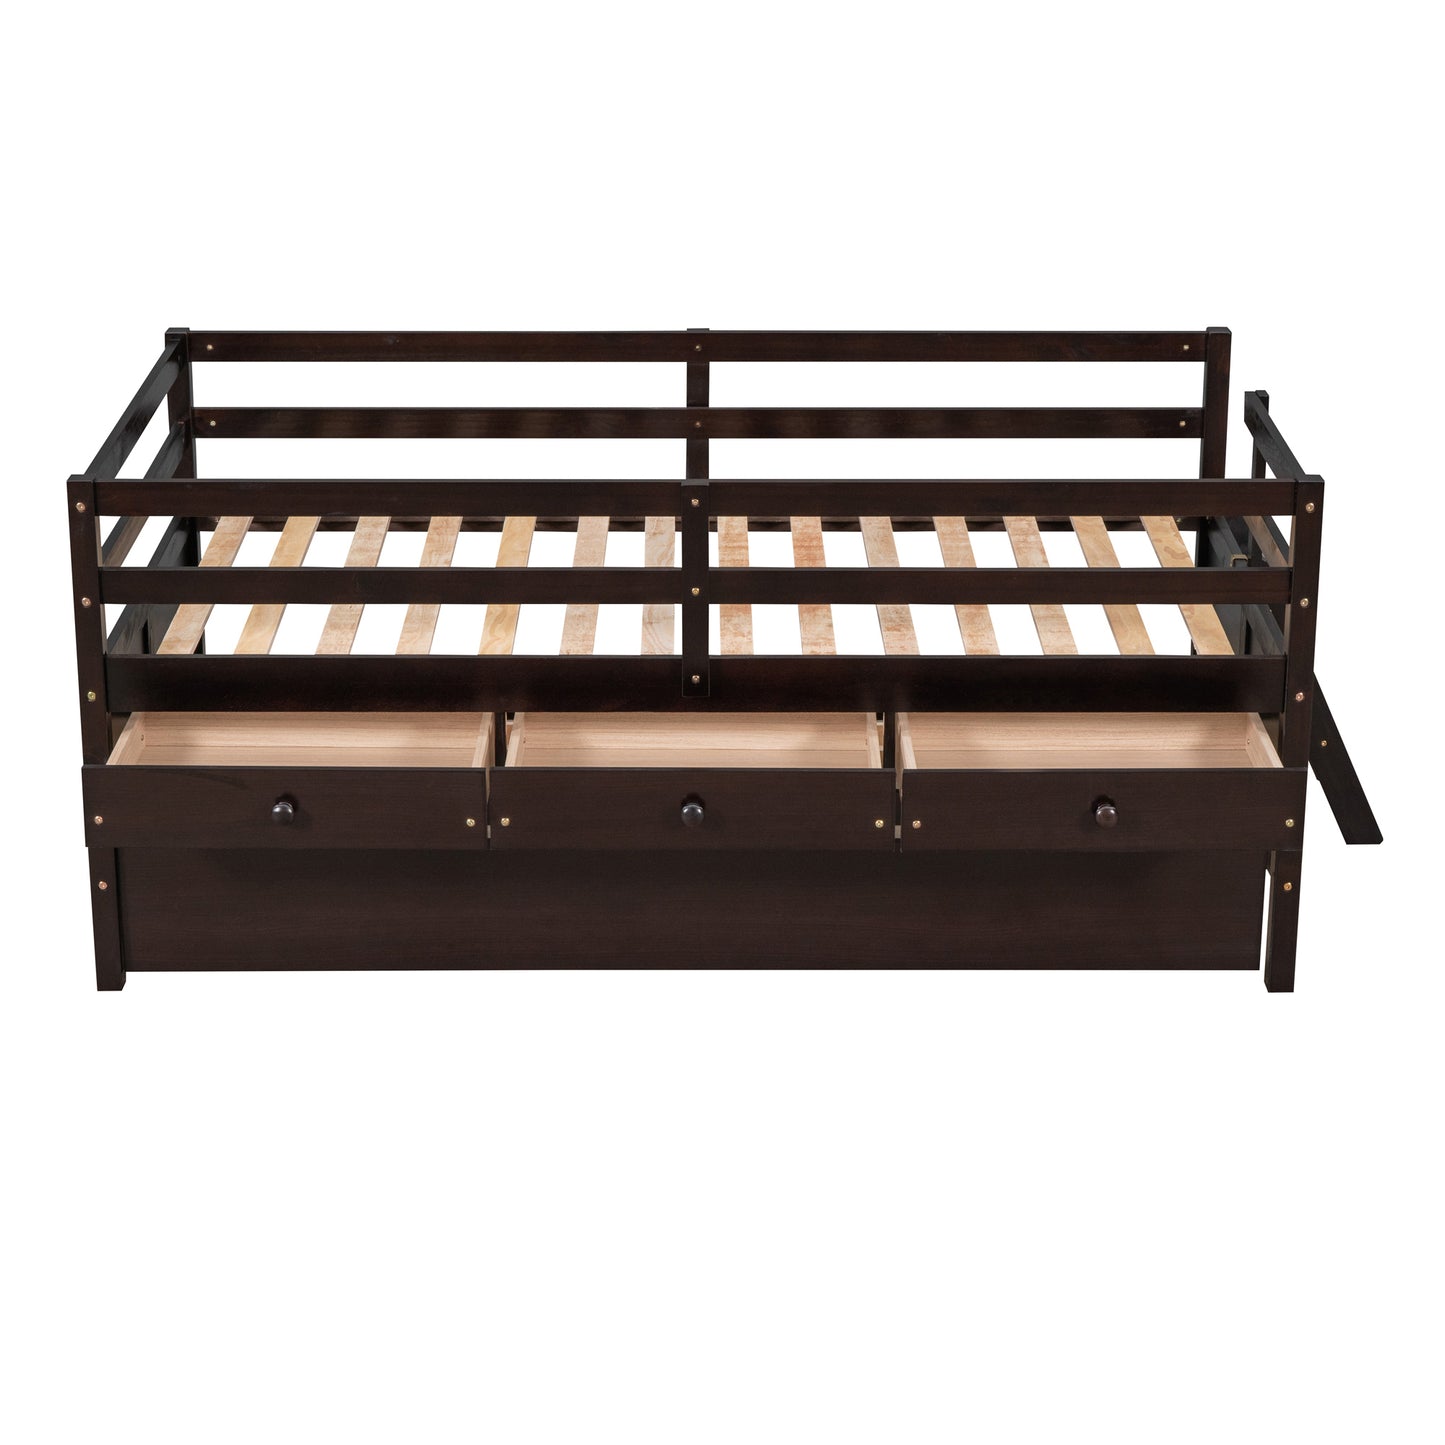 Low Loft Bed Twin Size with Full Safety Fence, Climbing ladder, Storage Drawers and Trundle Espresso Solid Wood Bed